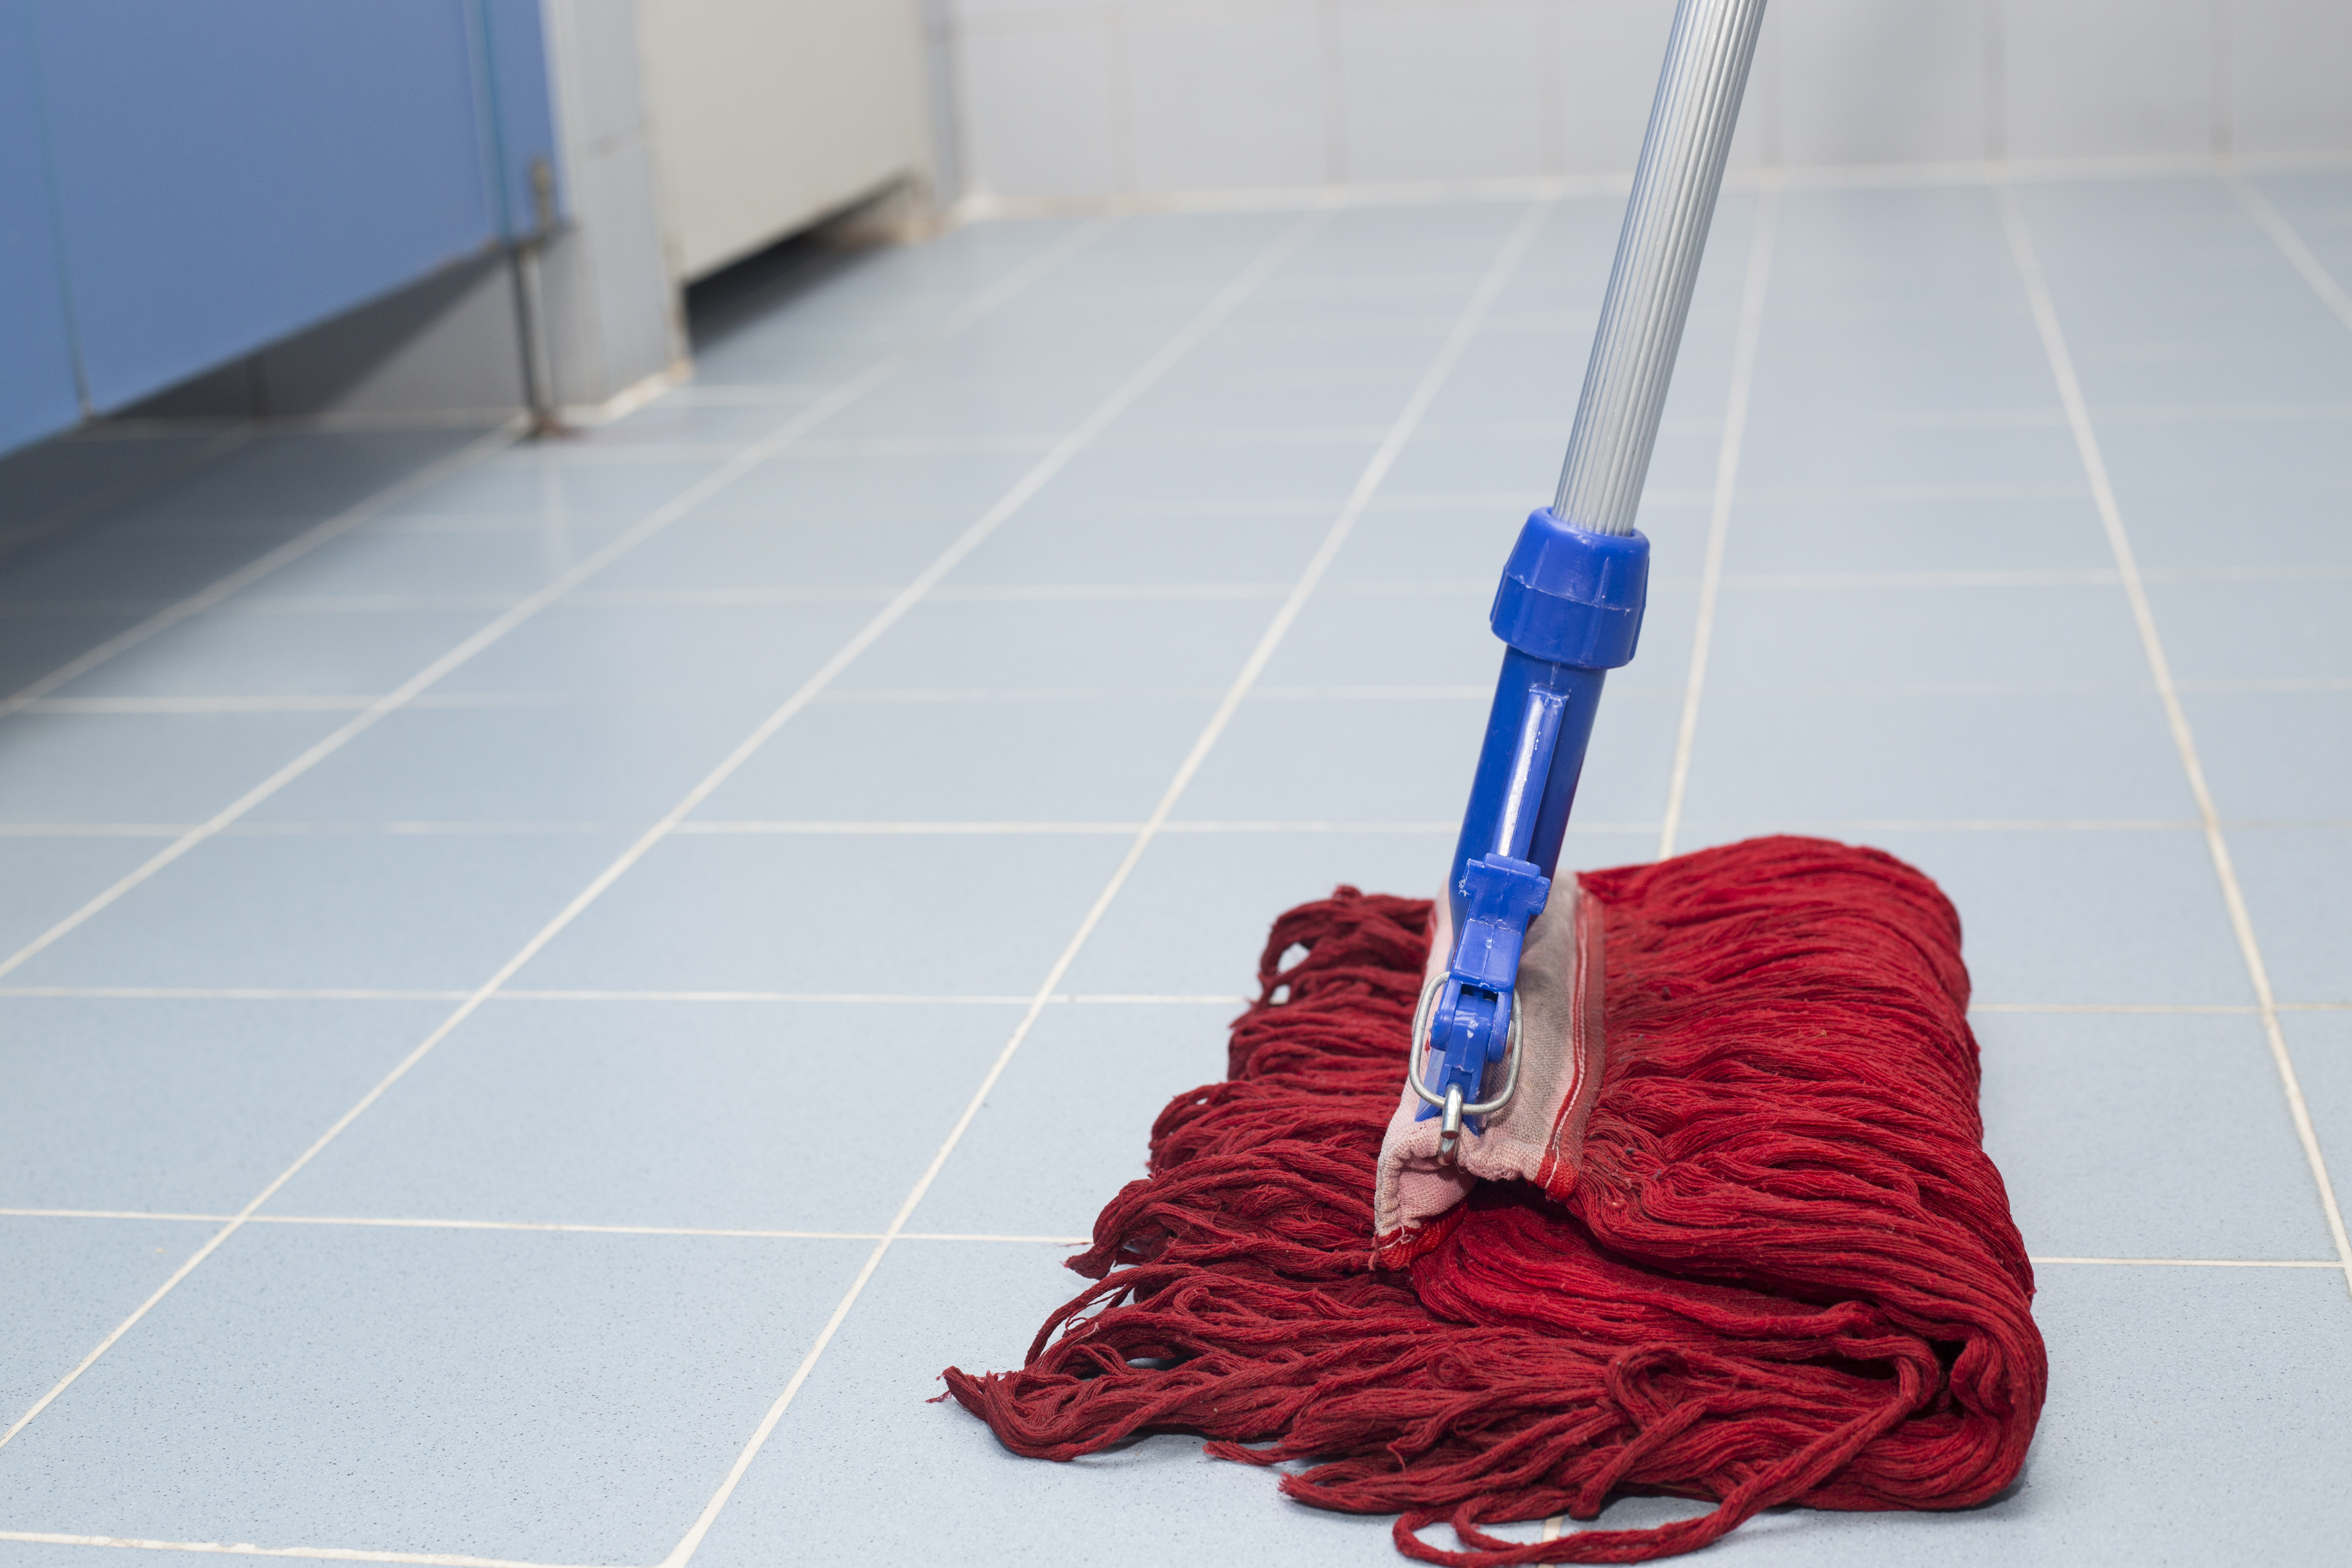 Easily And Efficiently Mop Dirty Floors (3 Pro Tips)